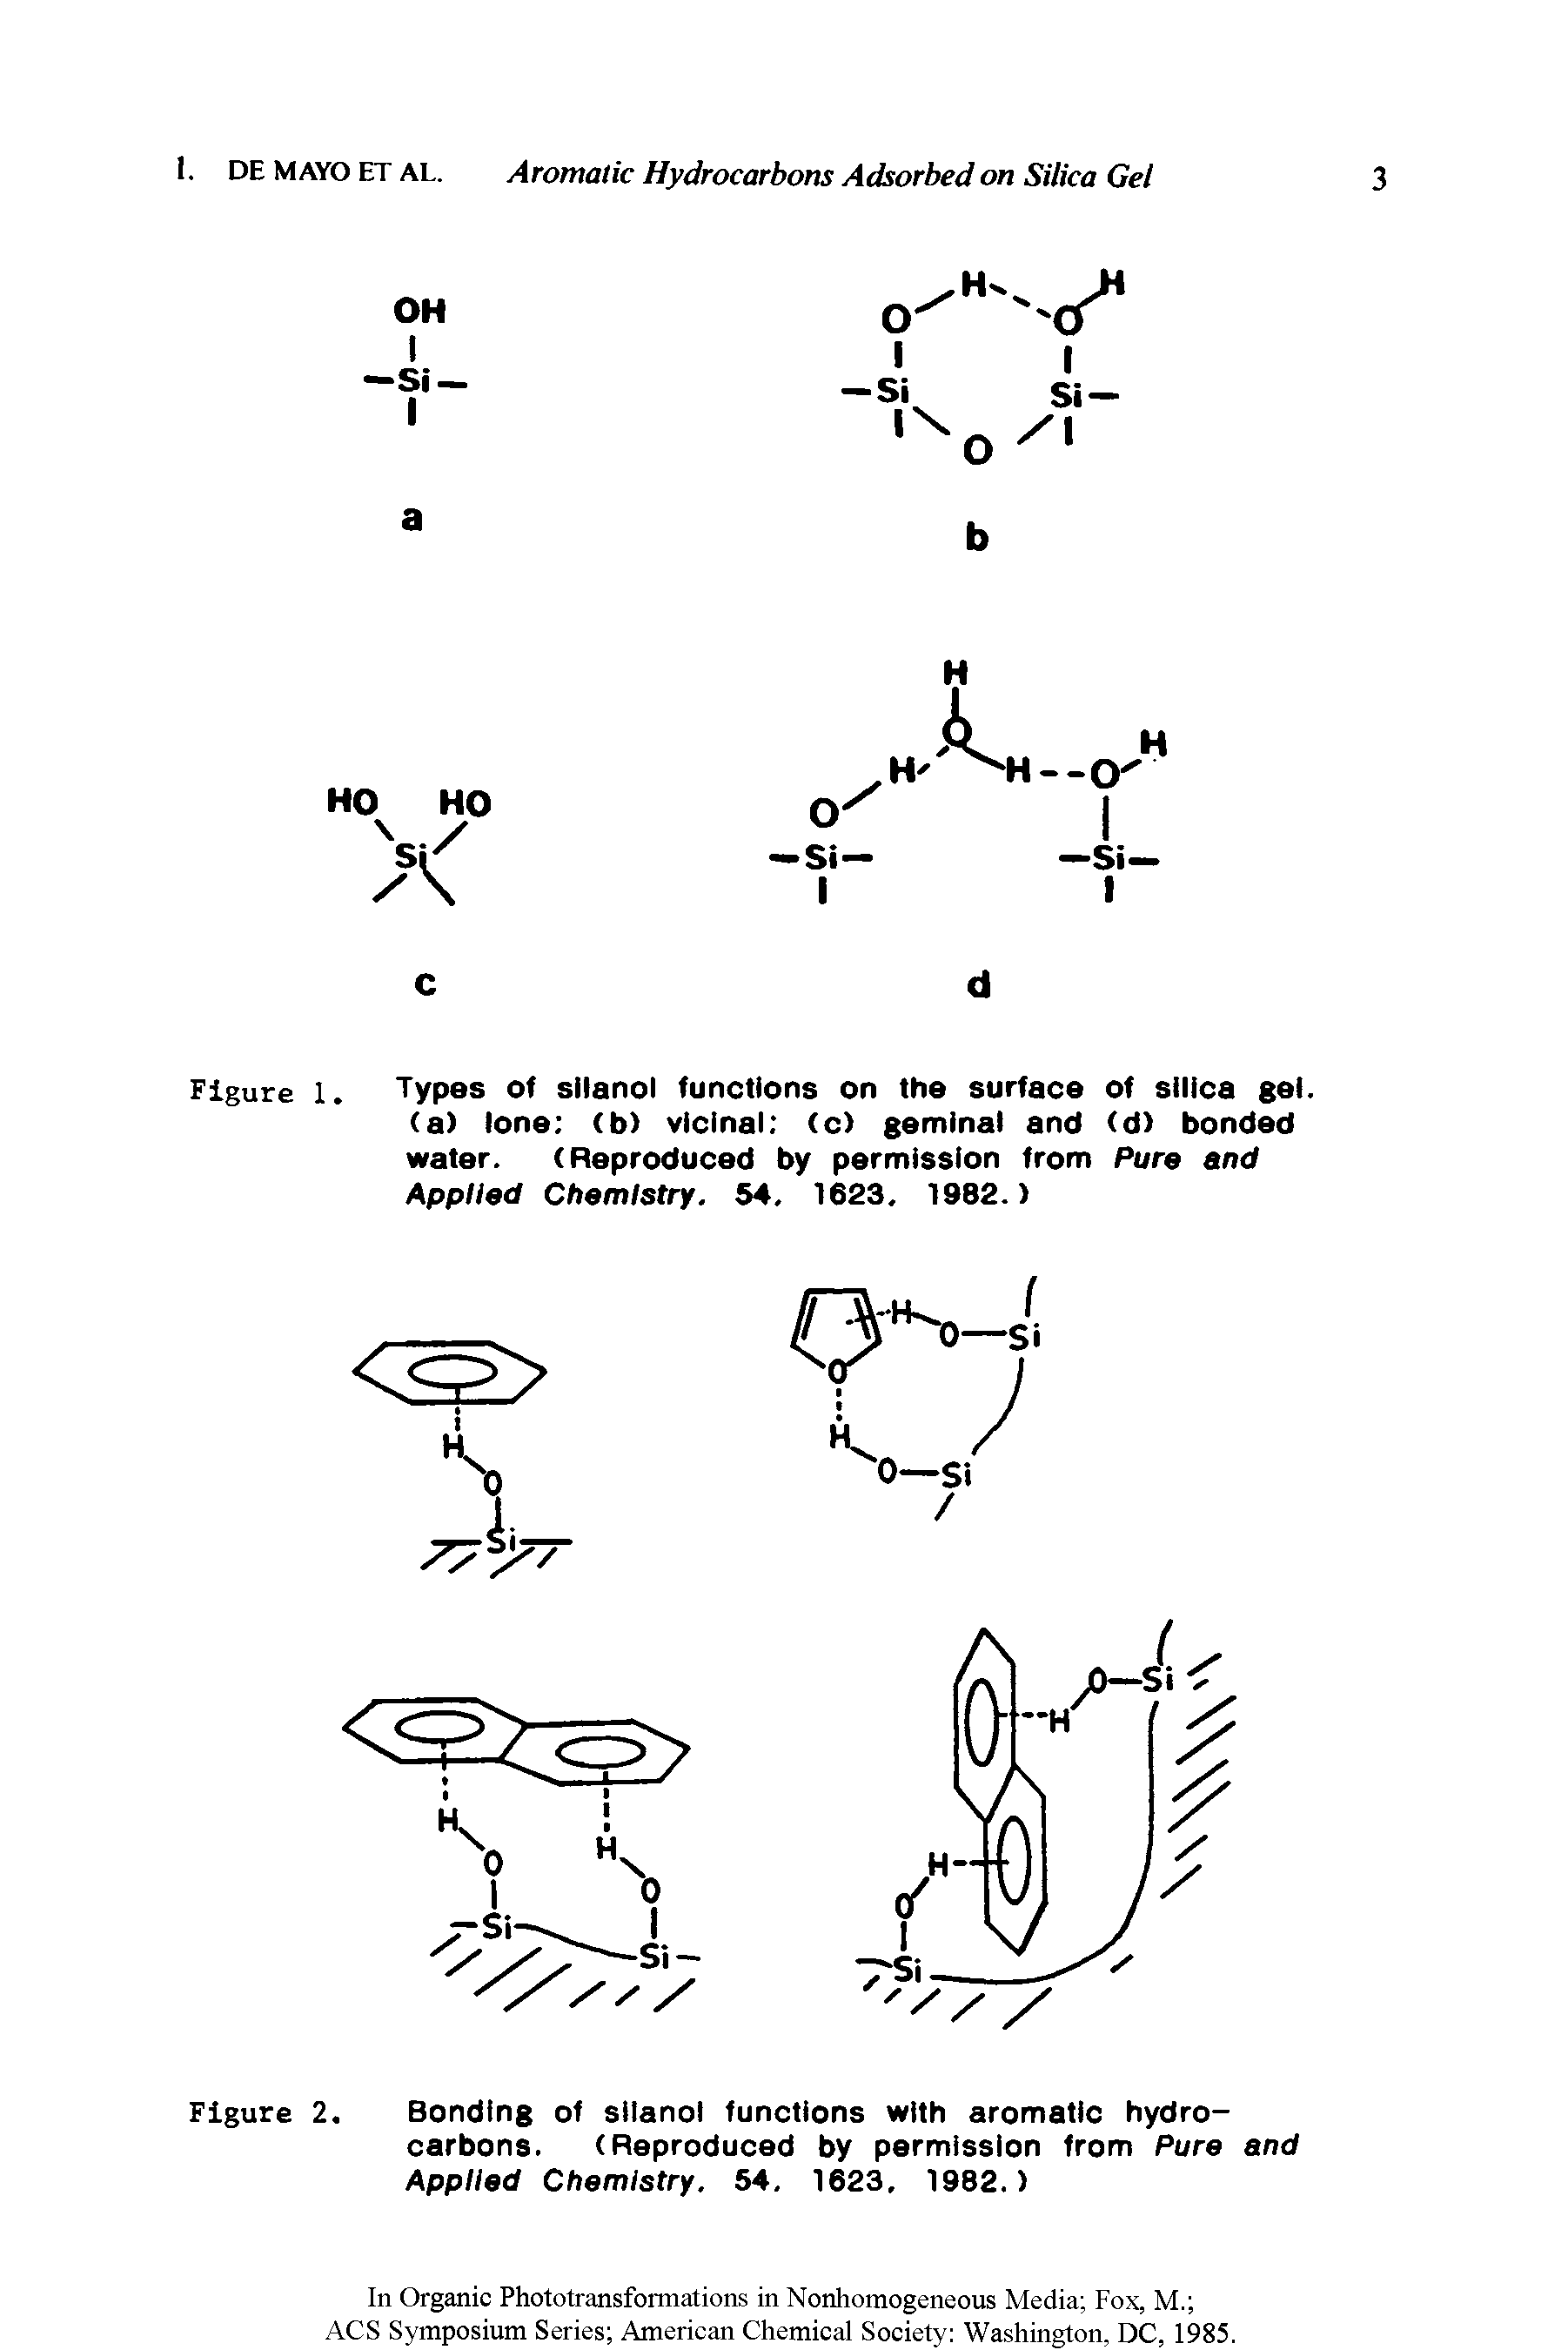 Figure 2. Bonding of silanol functions with aromatic hydrocarbons. (Reproduced by permission from Pure and Applied Chemistry. 54. 1623. 1982.)...